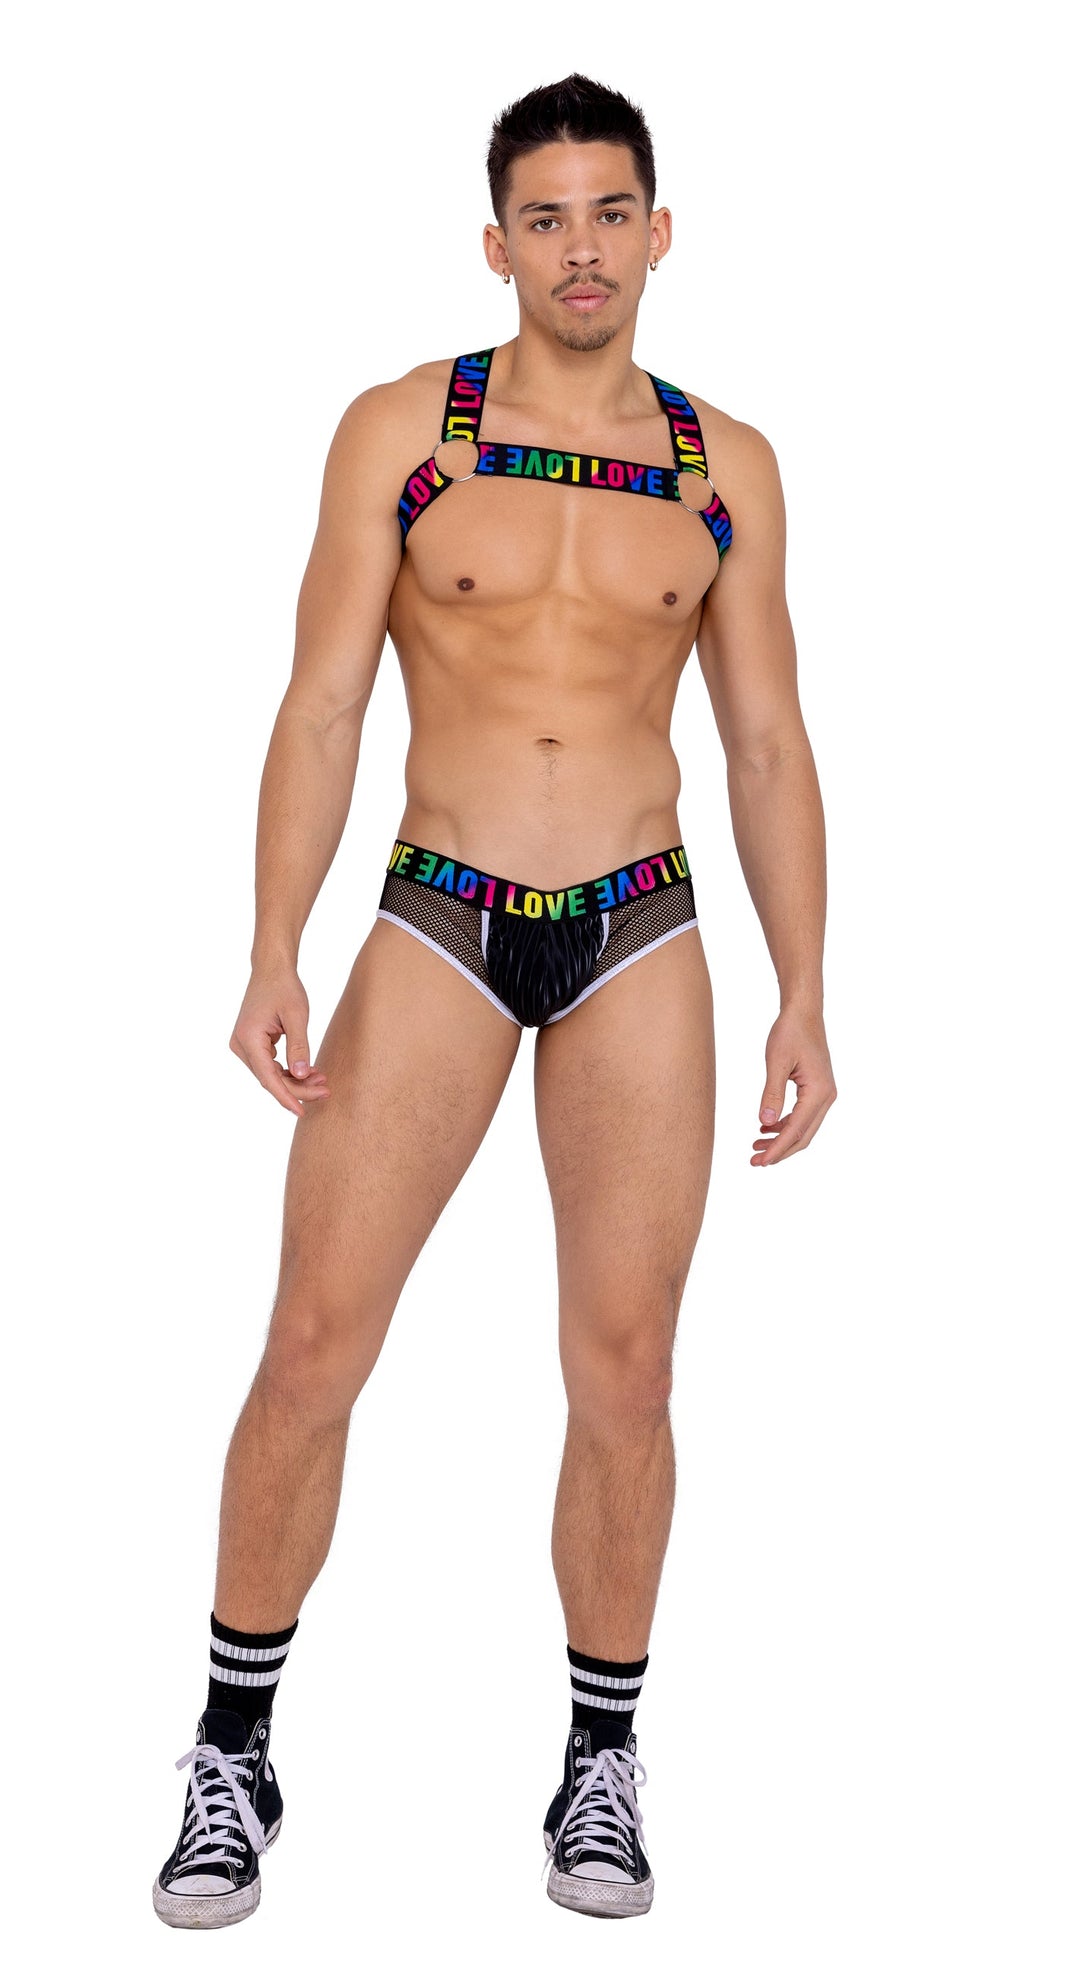 Briefs with Fishnet Panel Men's Costume